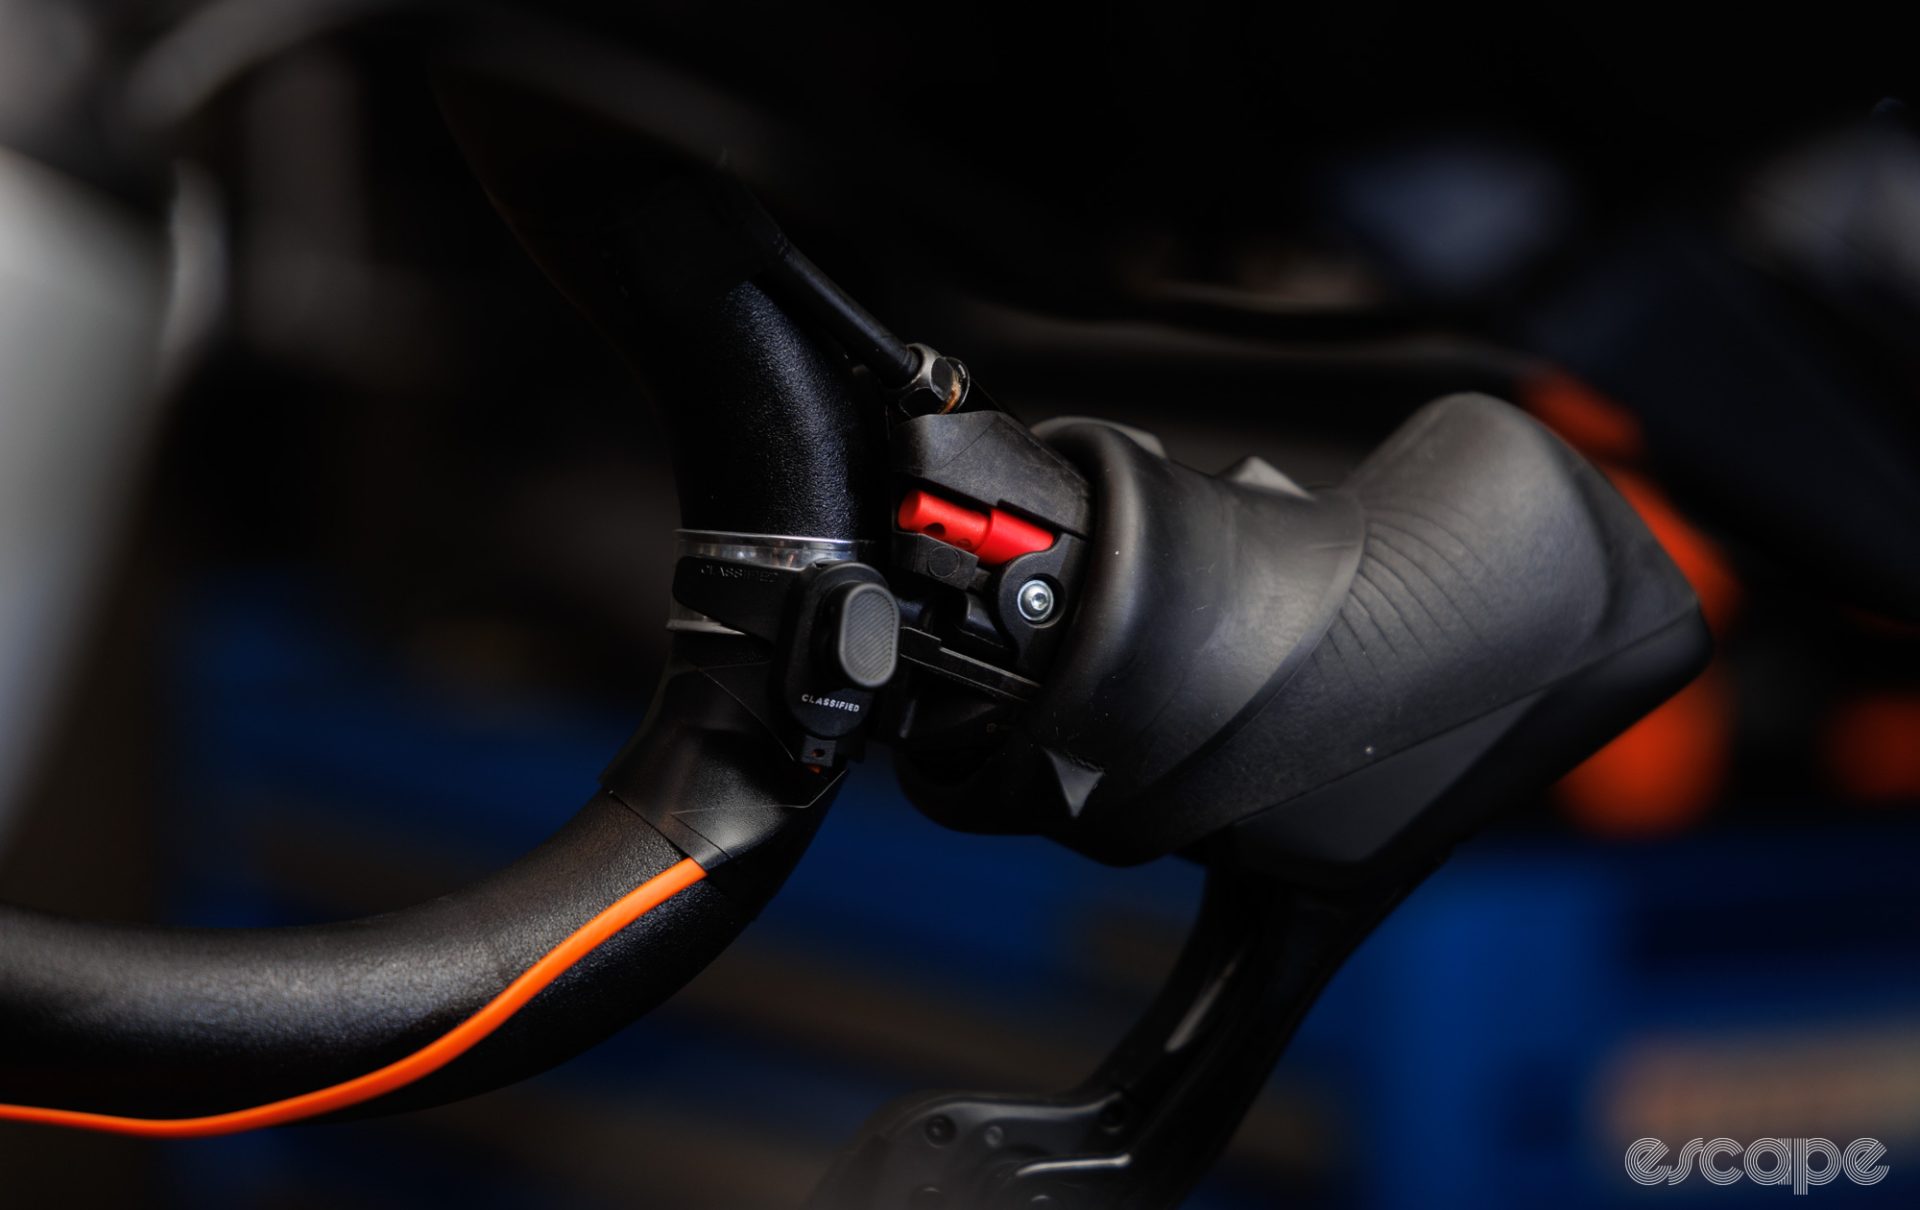 The sprint shifter is placed under the bar tap and wired to the wireless transmitter at the bar end.